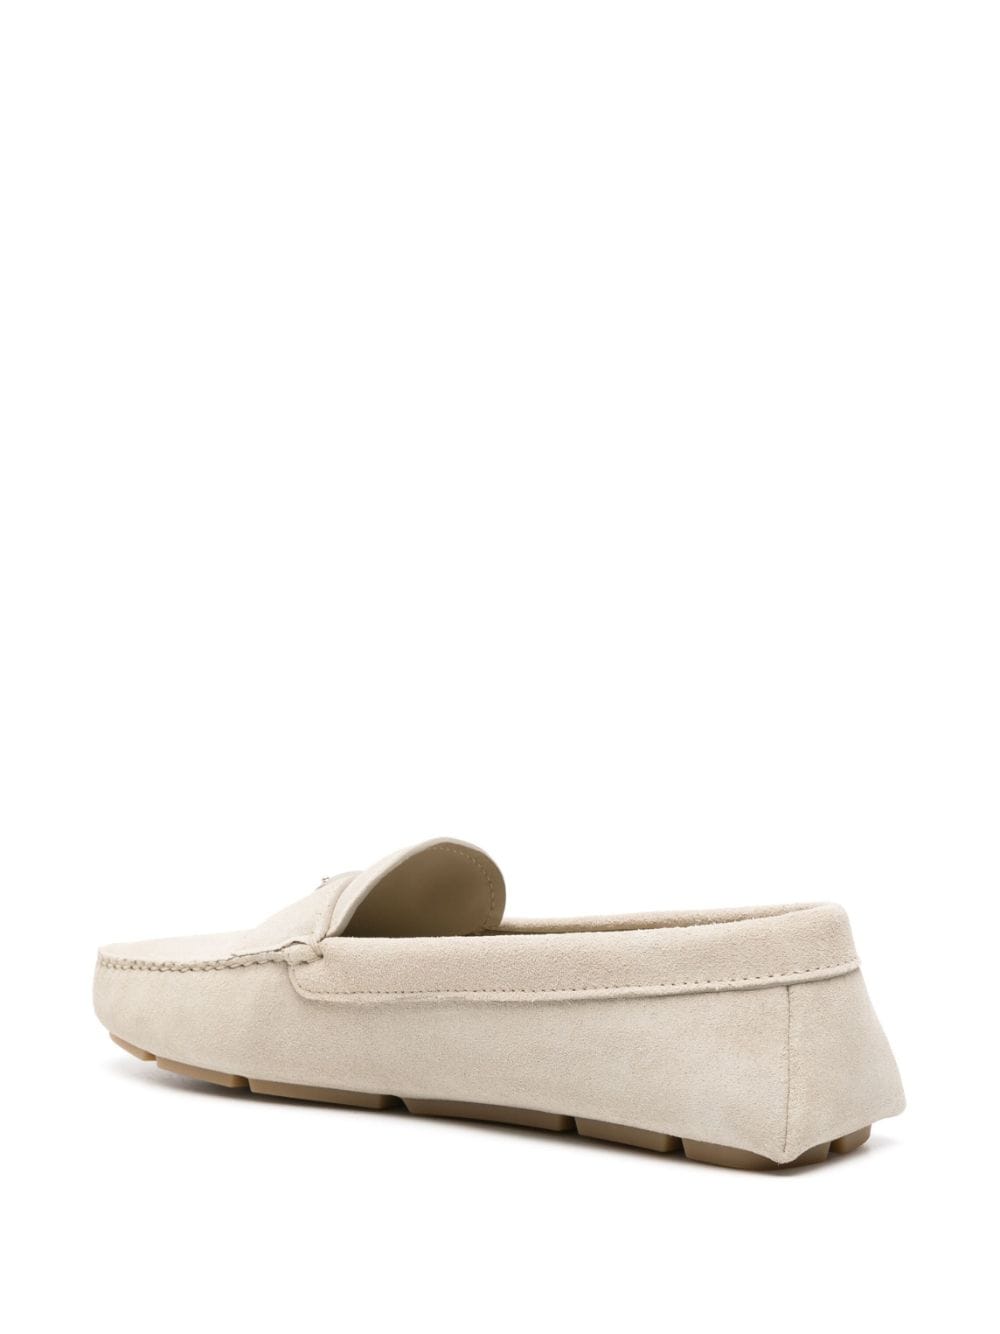 triangle-logo suede loafers-2